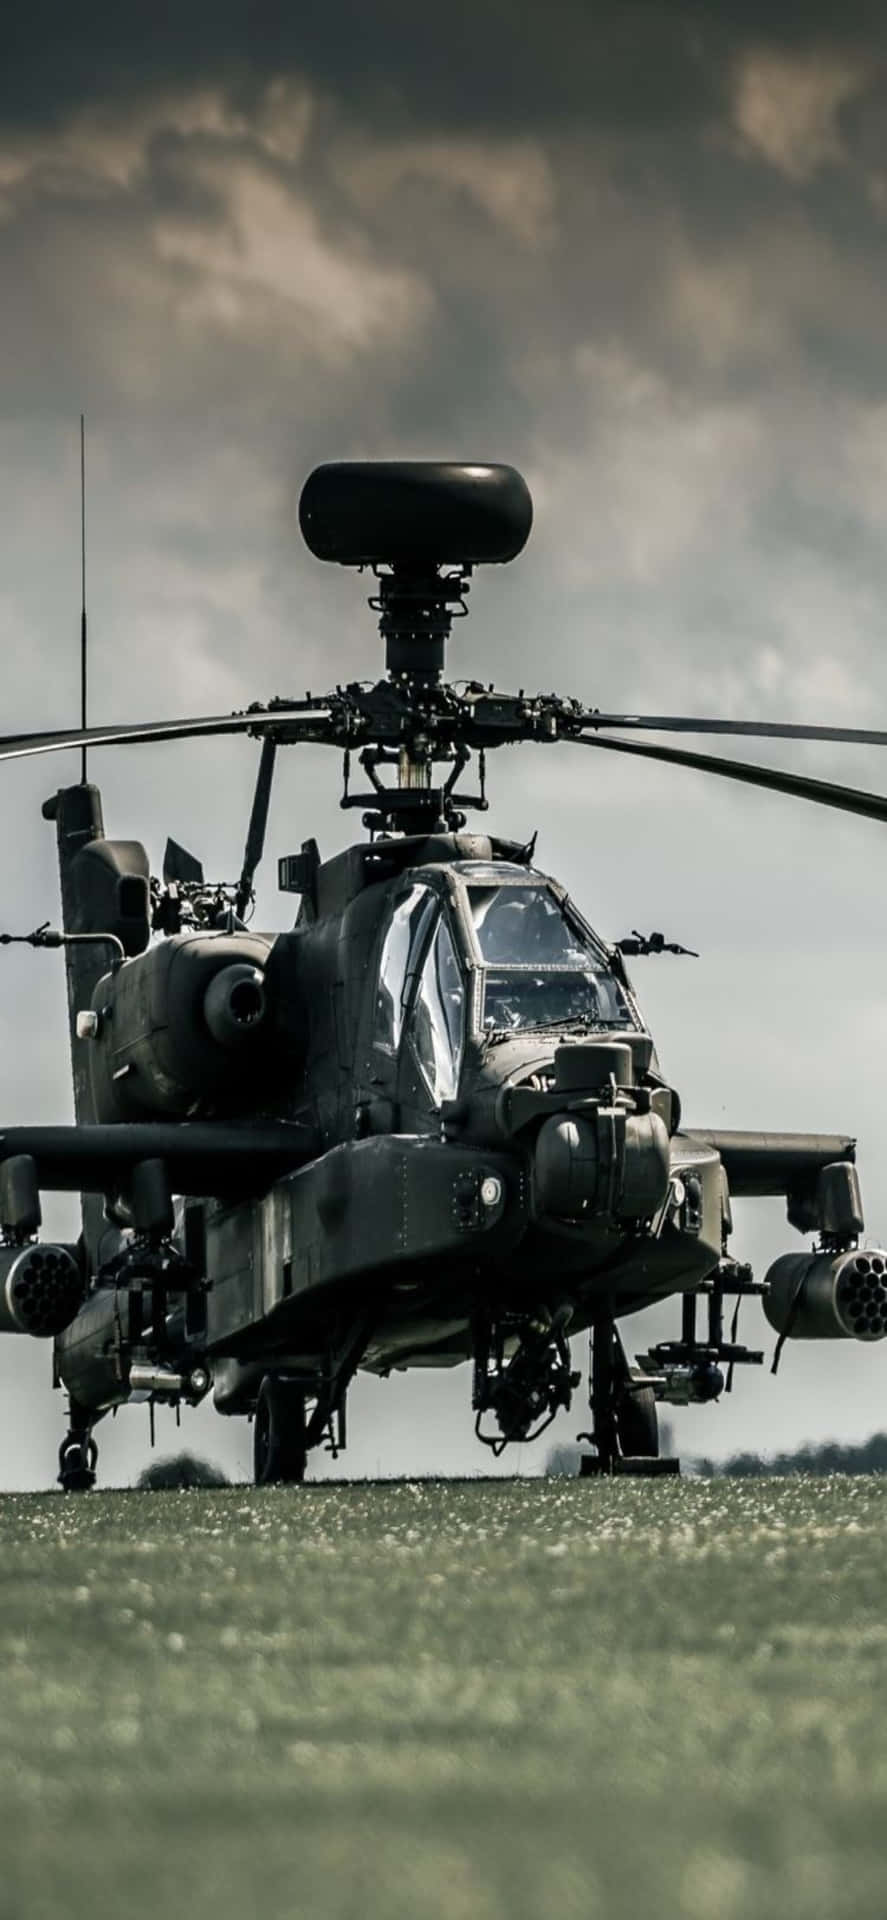 Unique Helicopter Wallpaper iPhone  Air force wallpaper Helicopter Plane  wallpaper